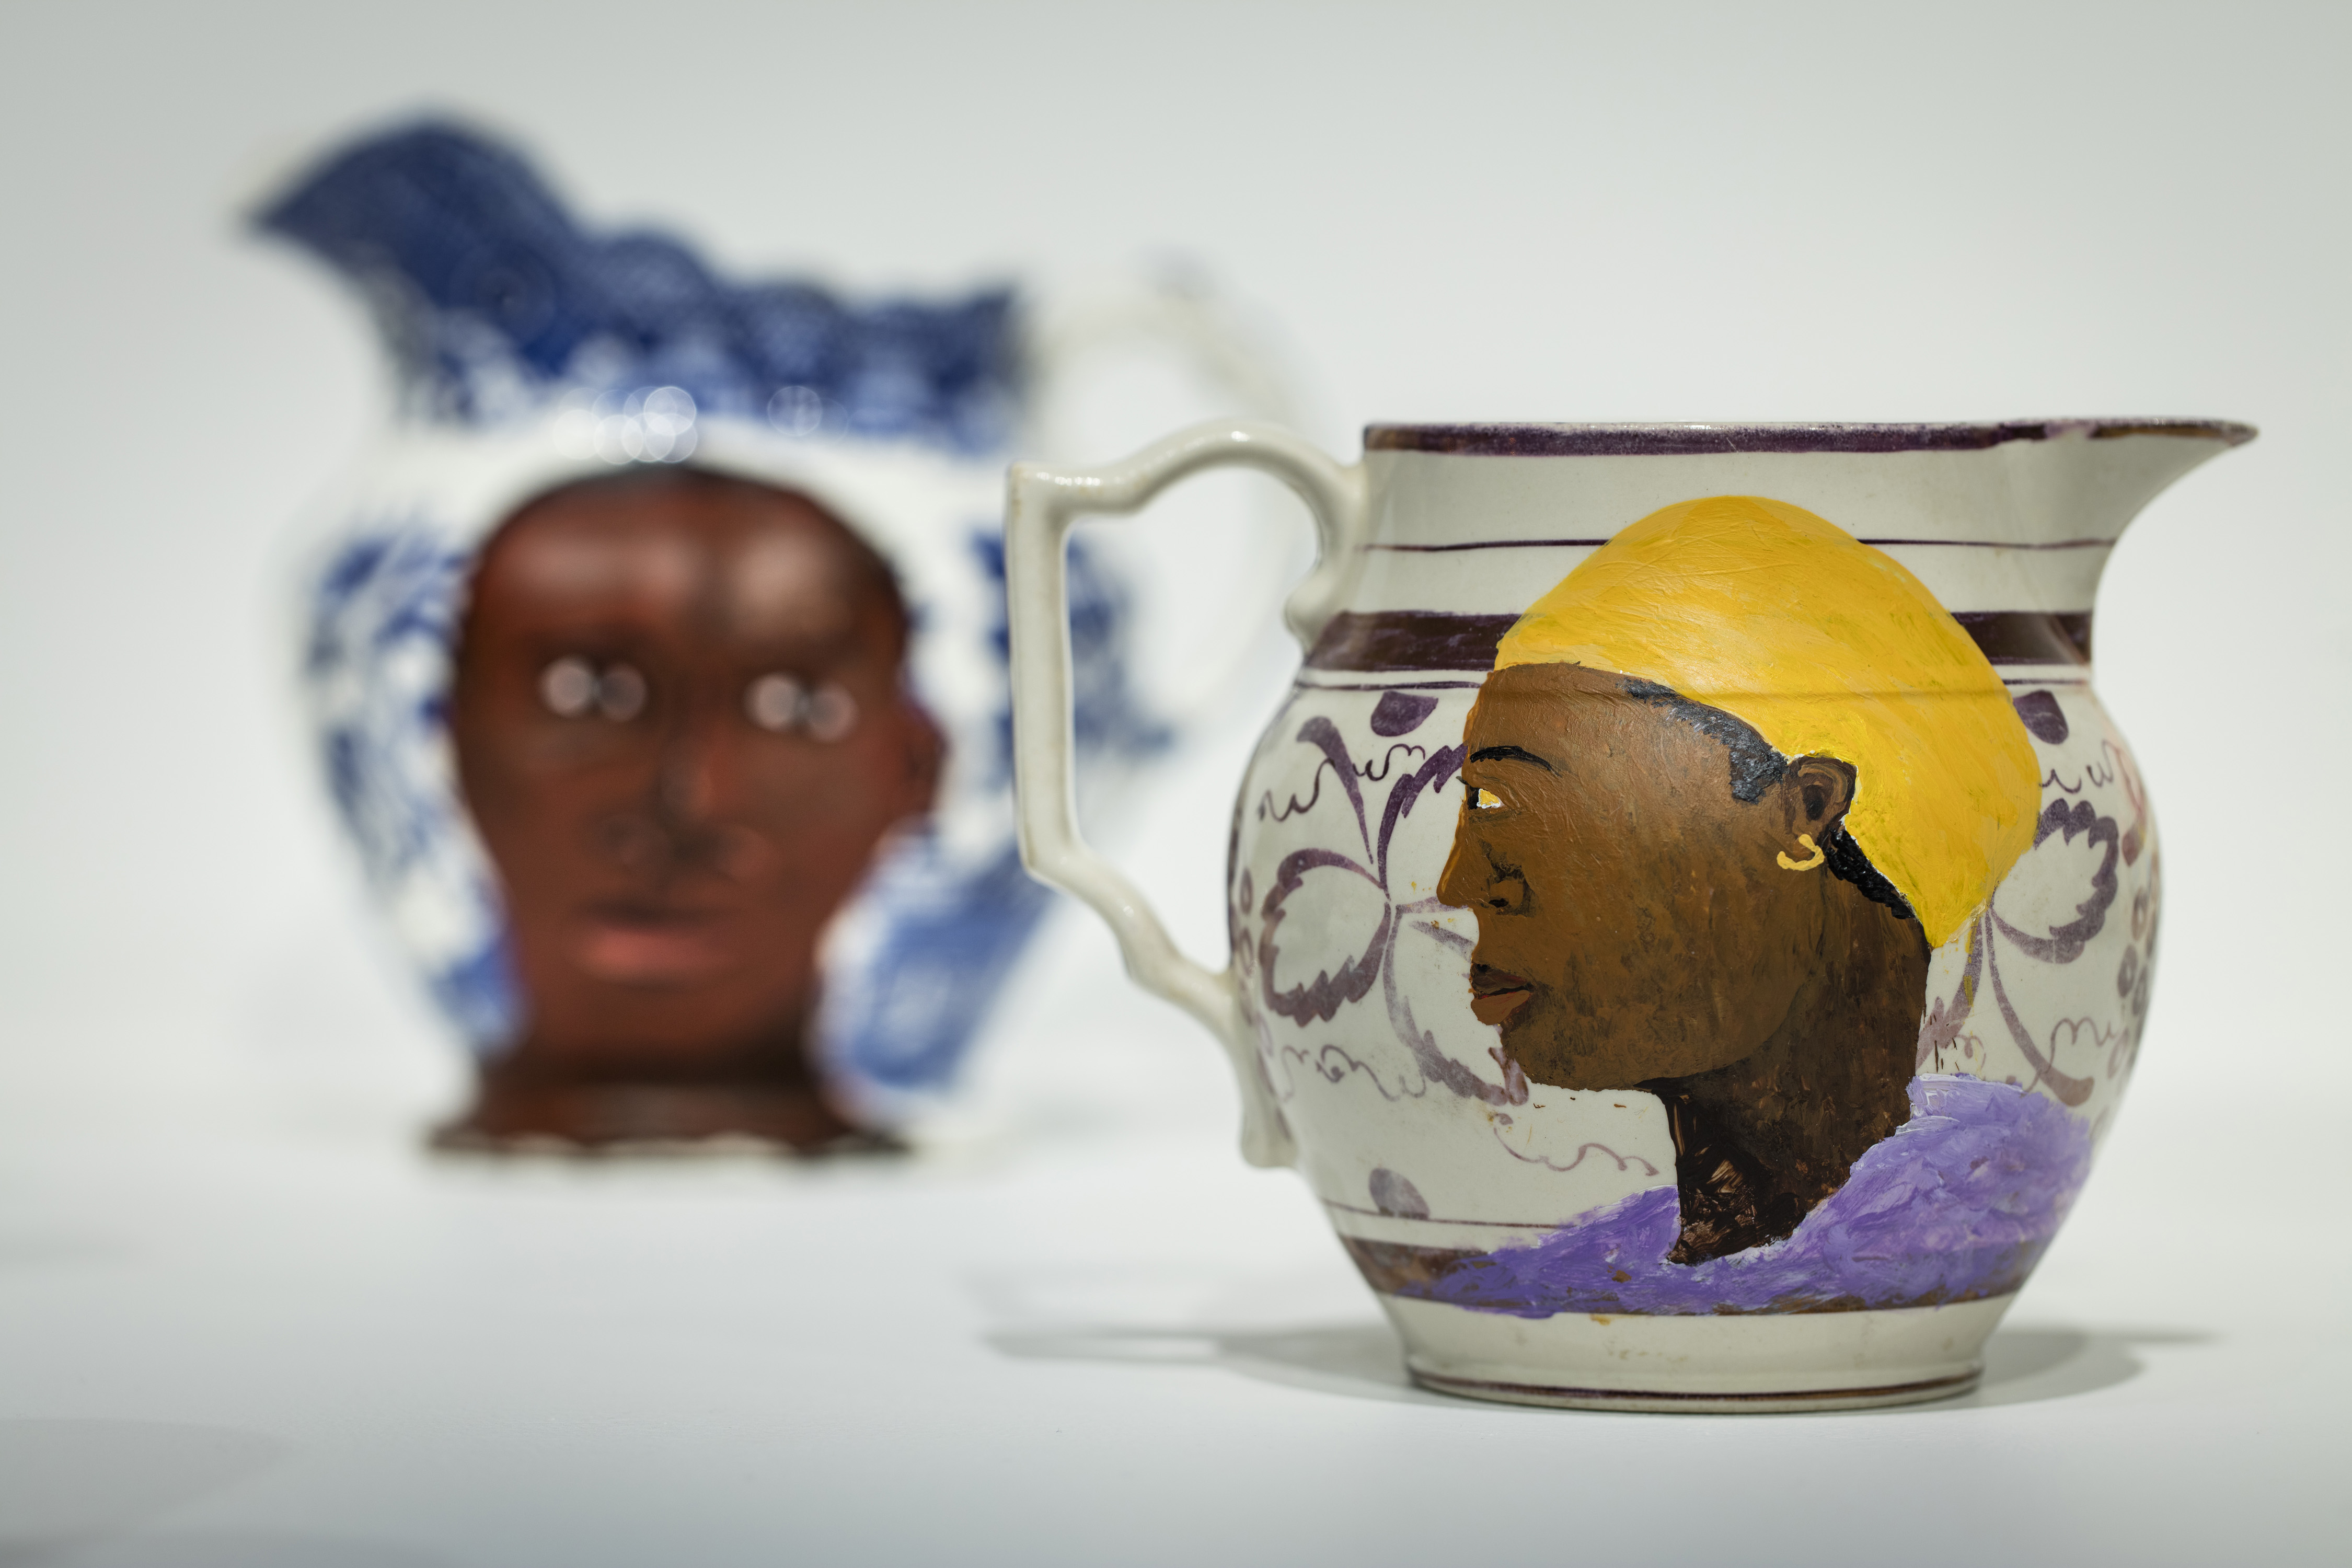 An image of two porcelain jugs. Both have been painted on by the artist, who has added tender portaits of black people to both. The paintings are vivid and overlaid on the existing patterns of the pieces.